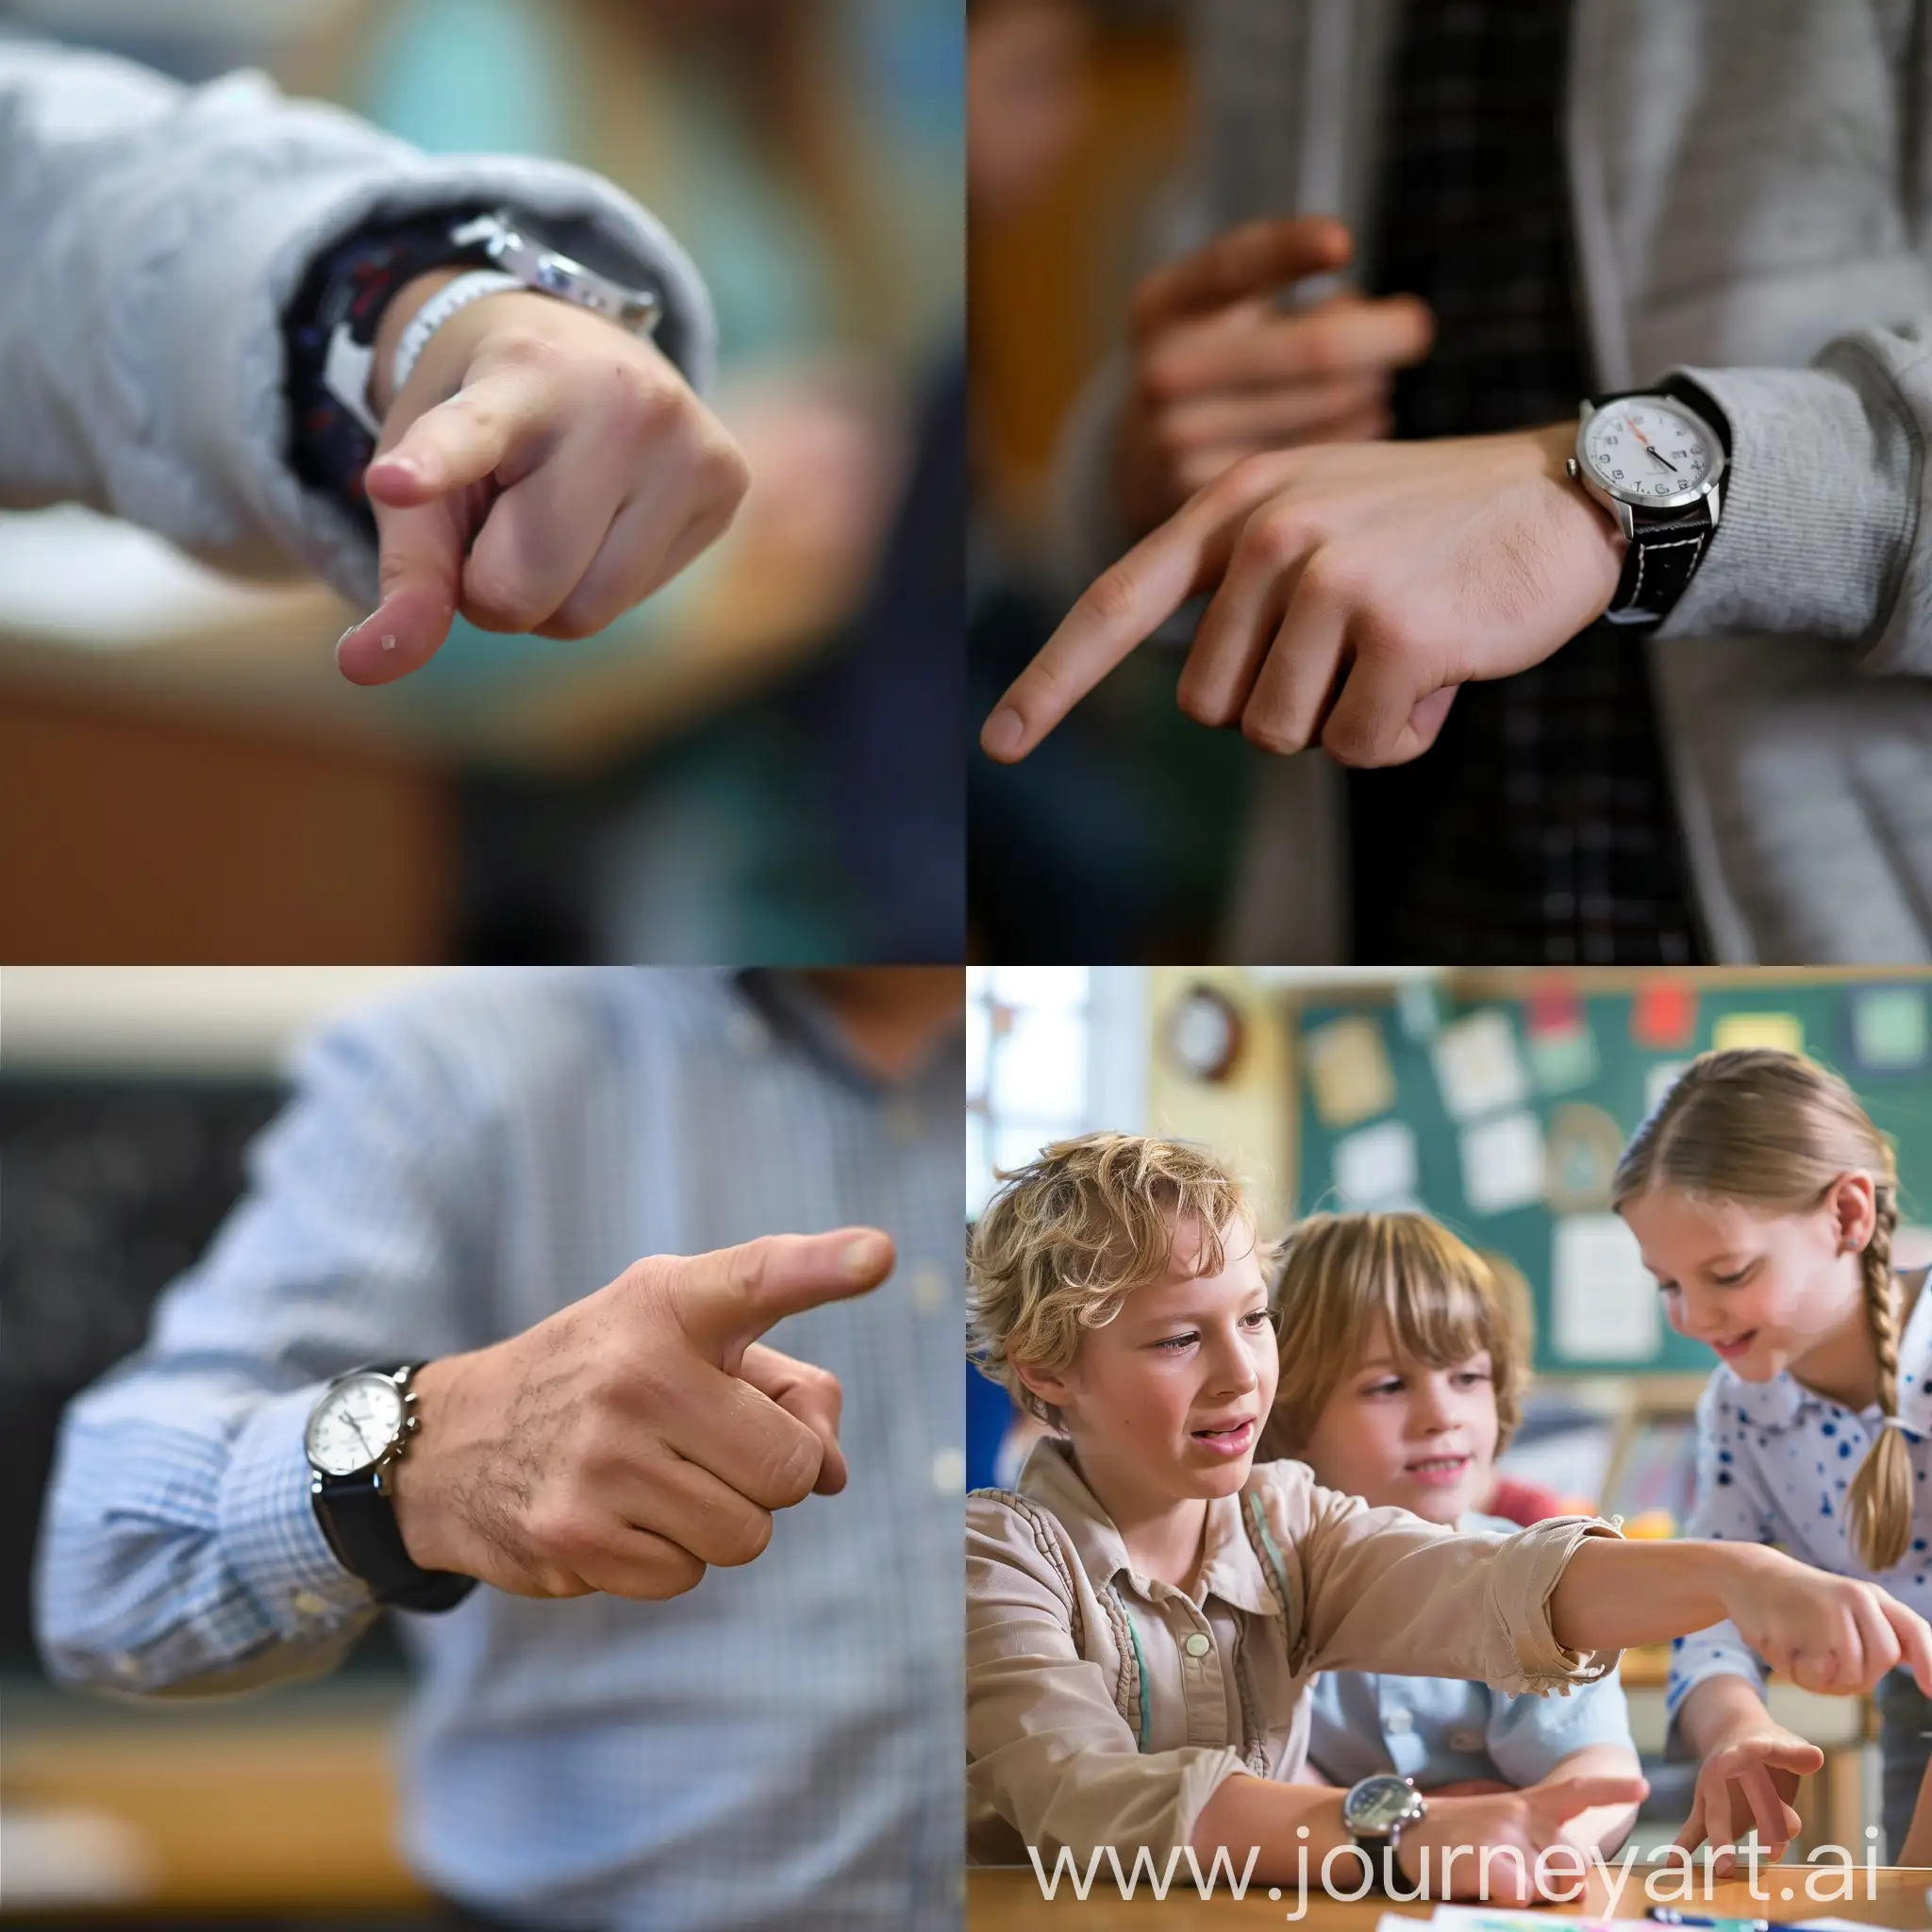 Teacher-Pointing-at-Watch-in-Classroom